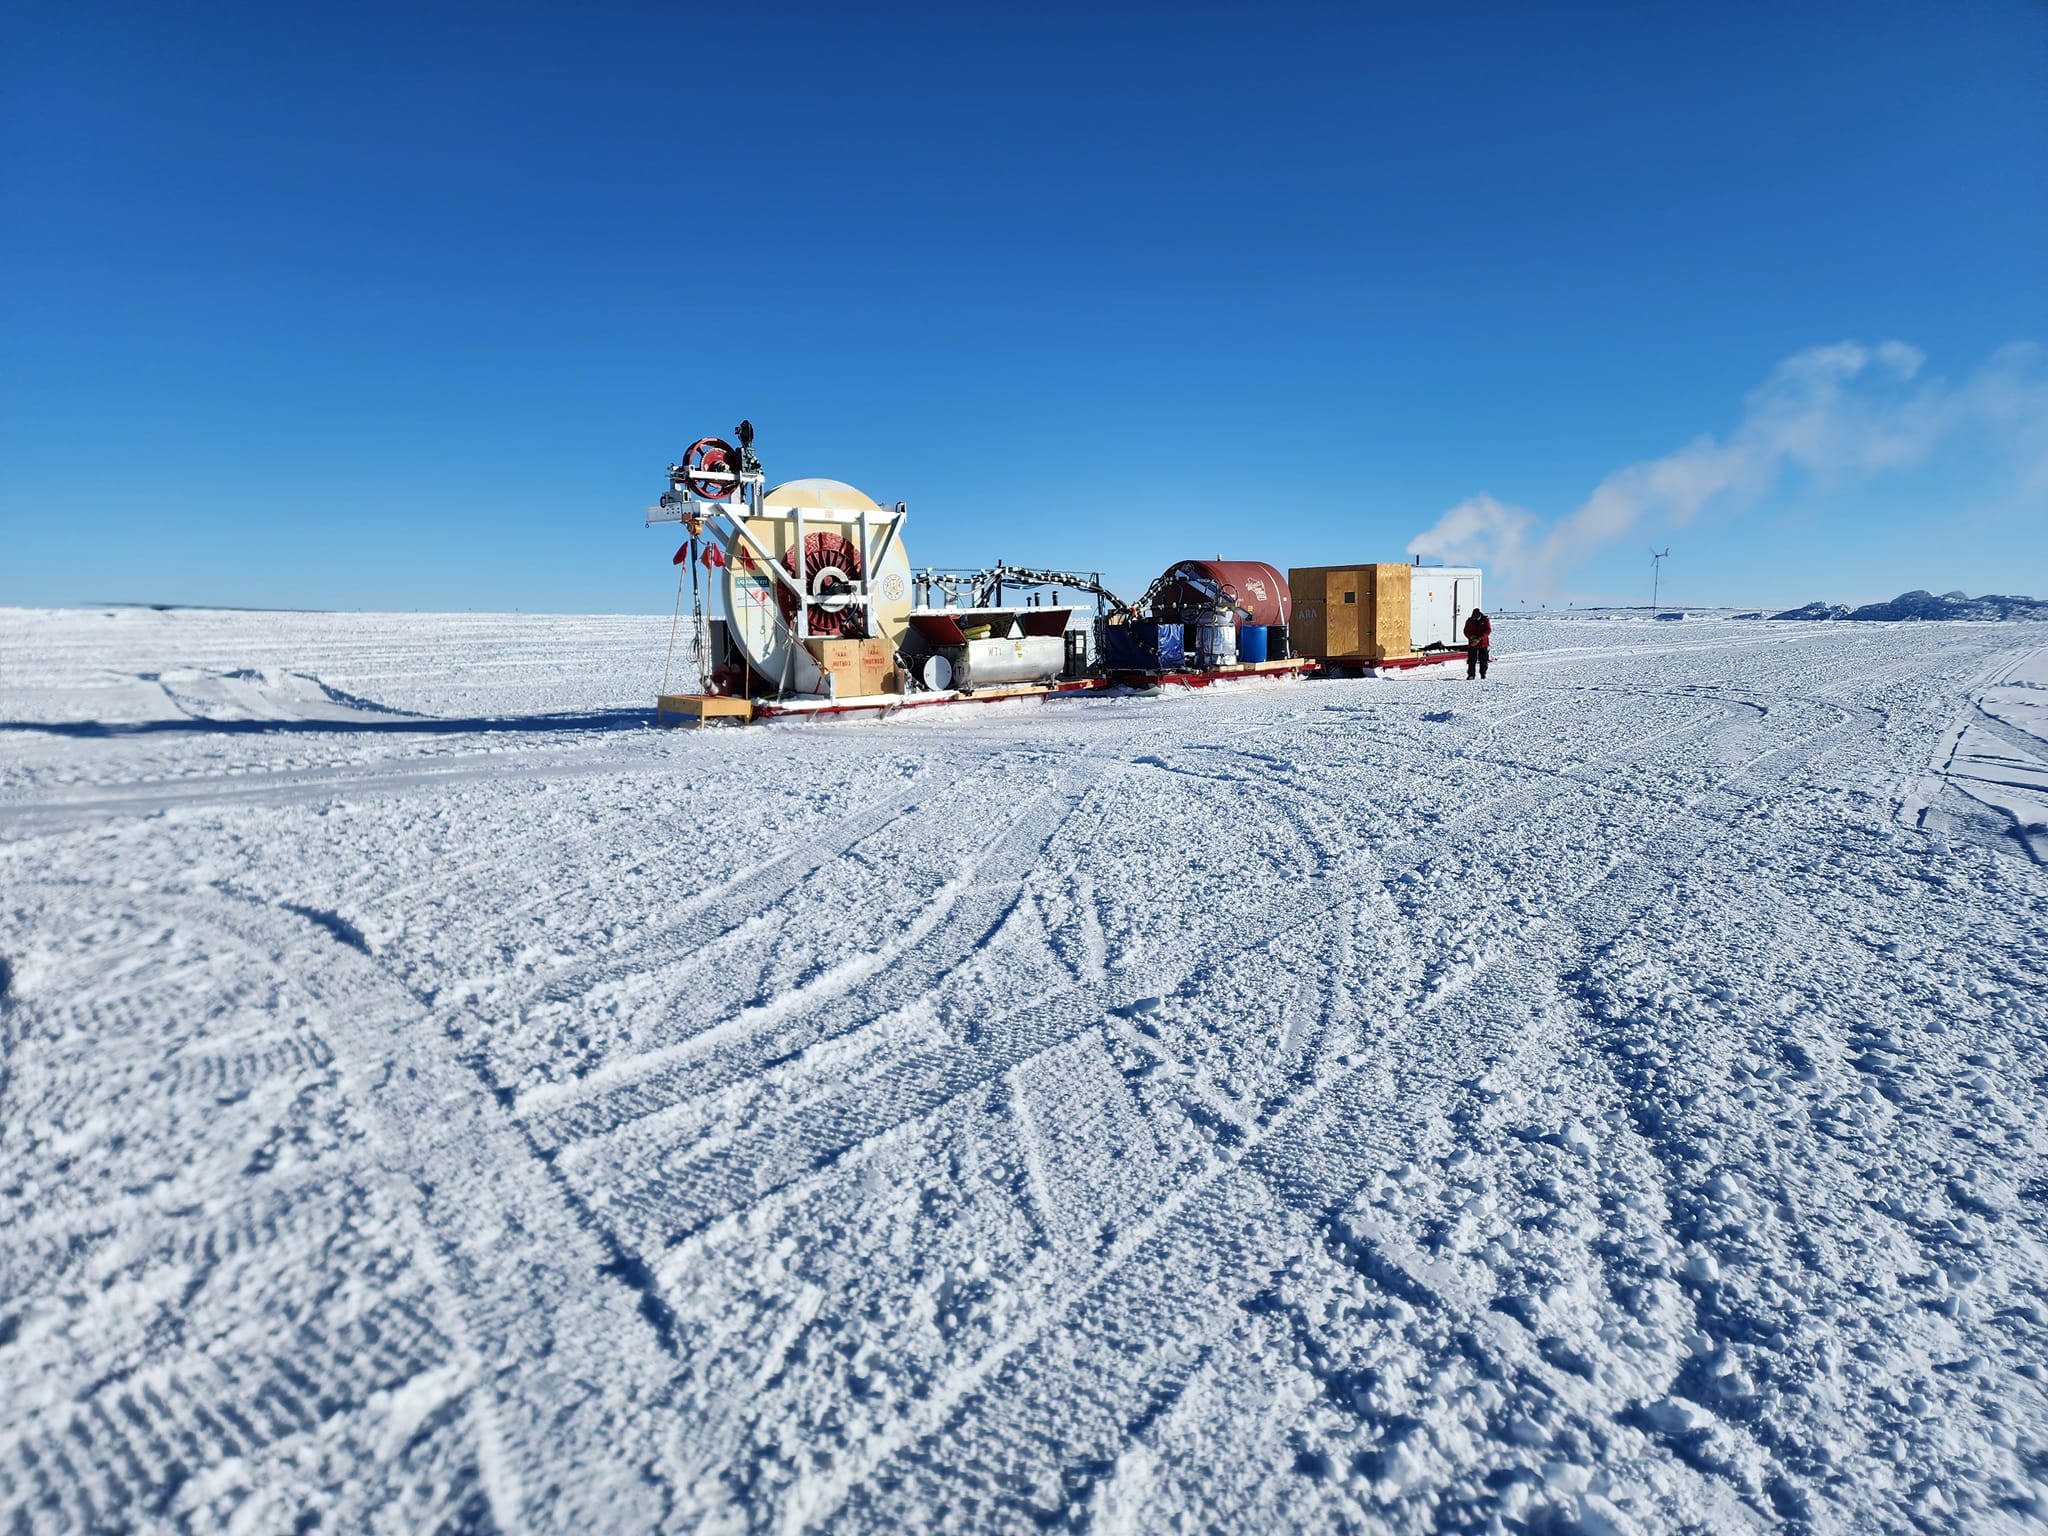 The ARA drill at the South Pole